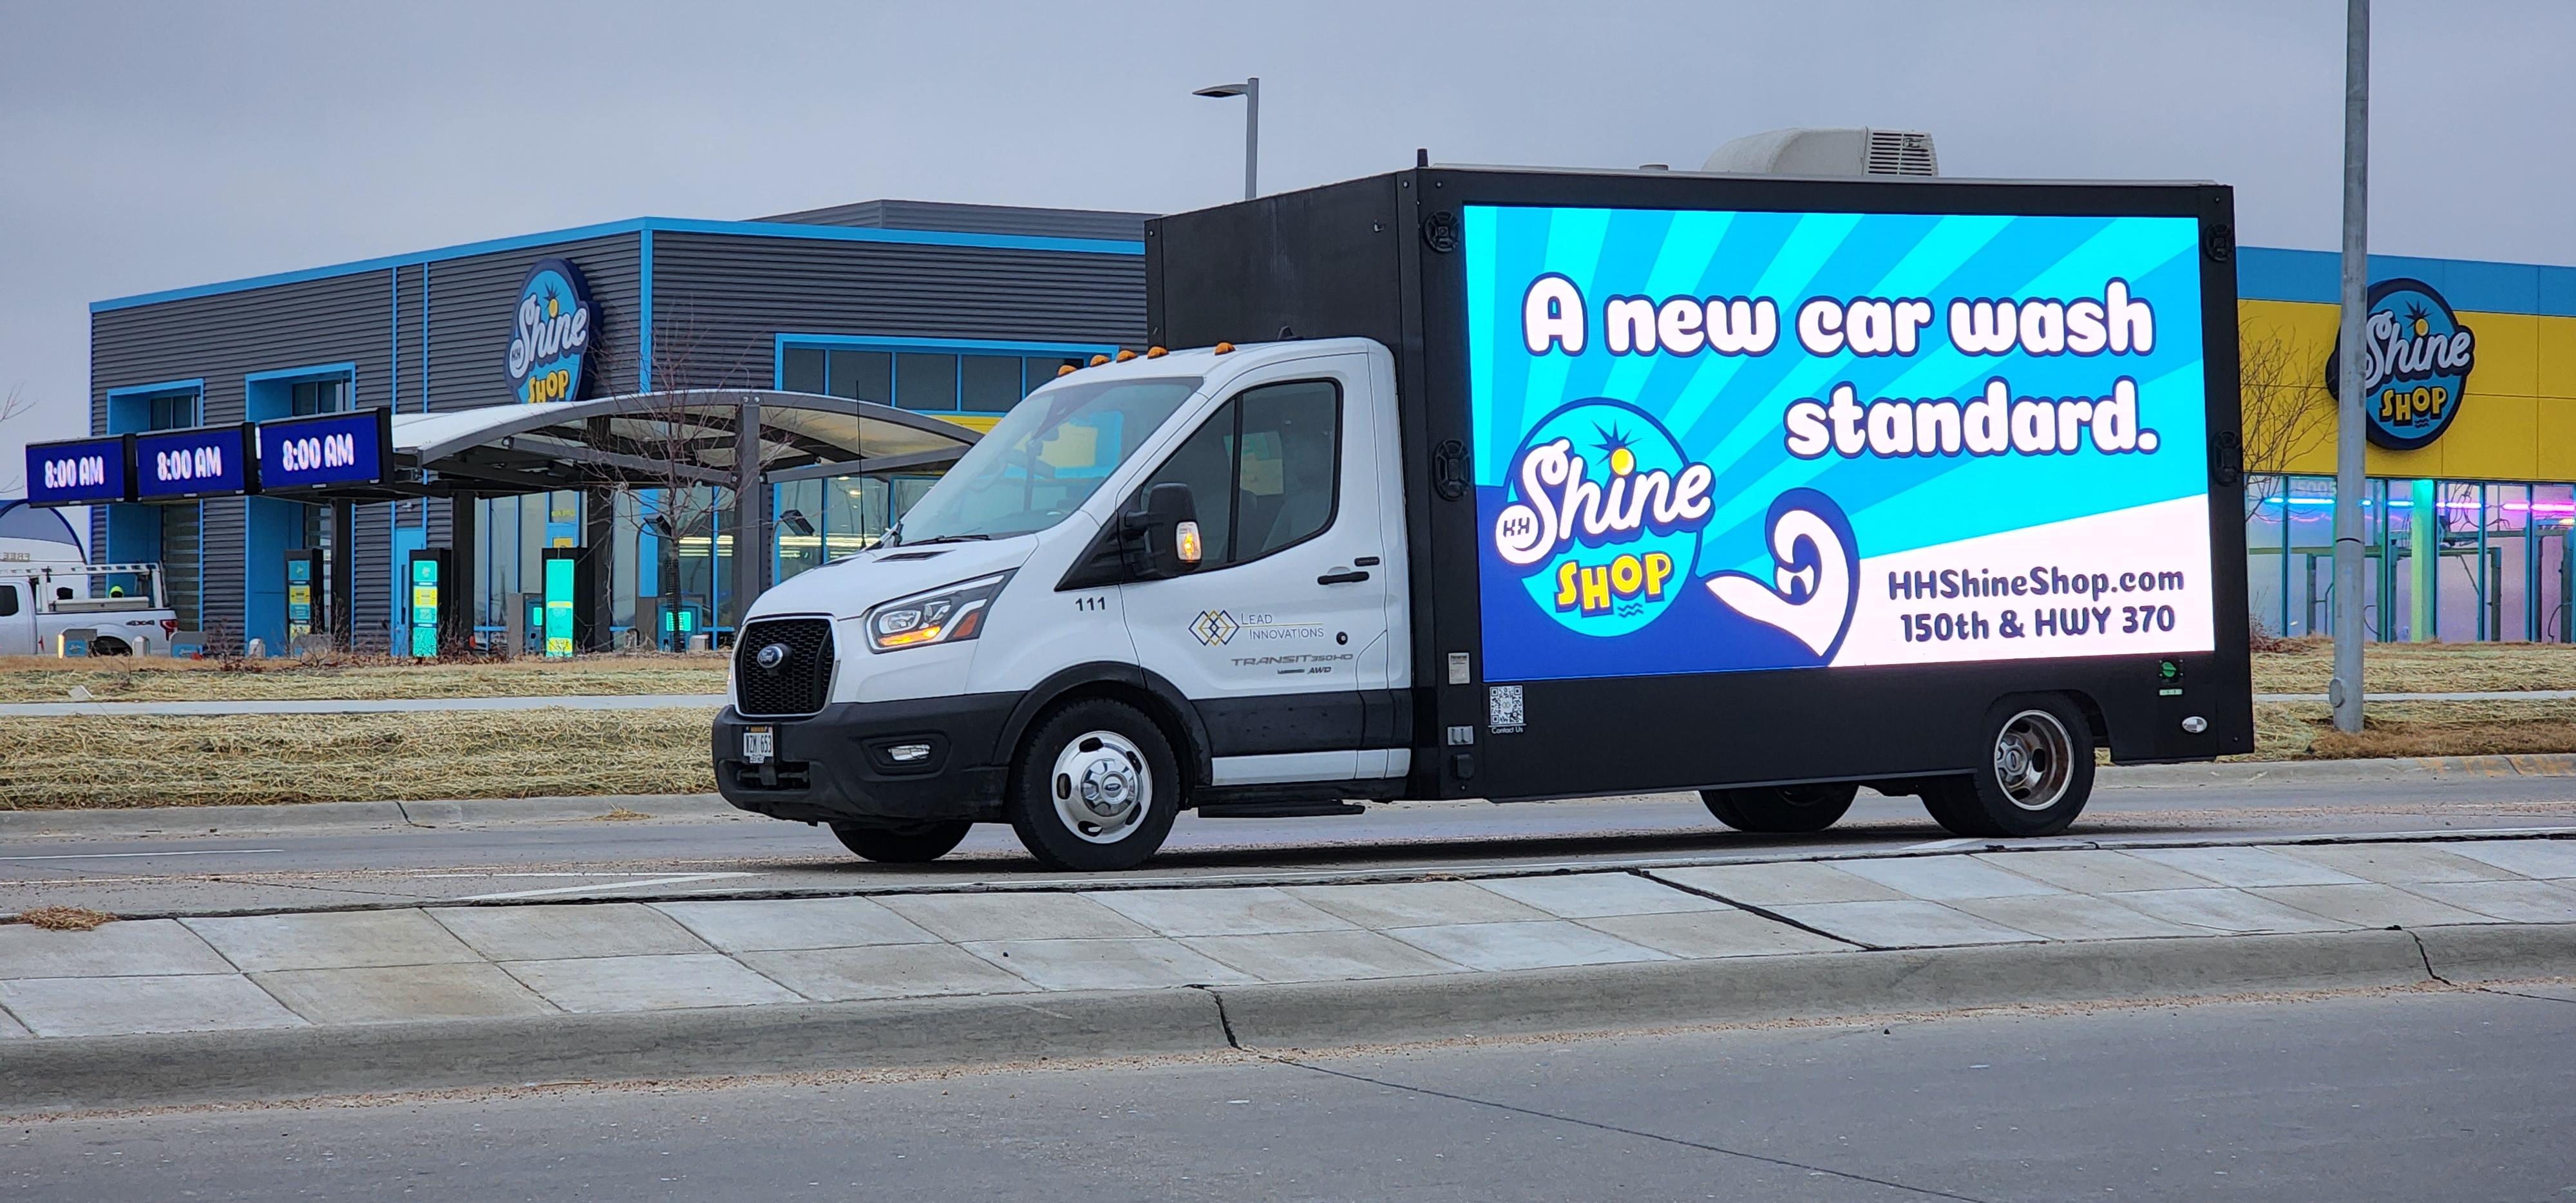 Lead Innovations mobile digital billboard truck in Omaha NE with ad for H&H Shine Shop